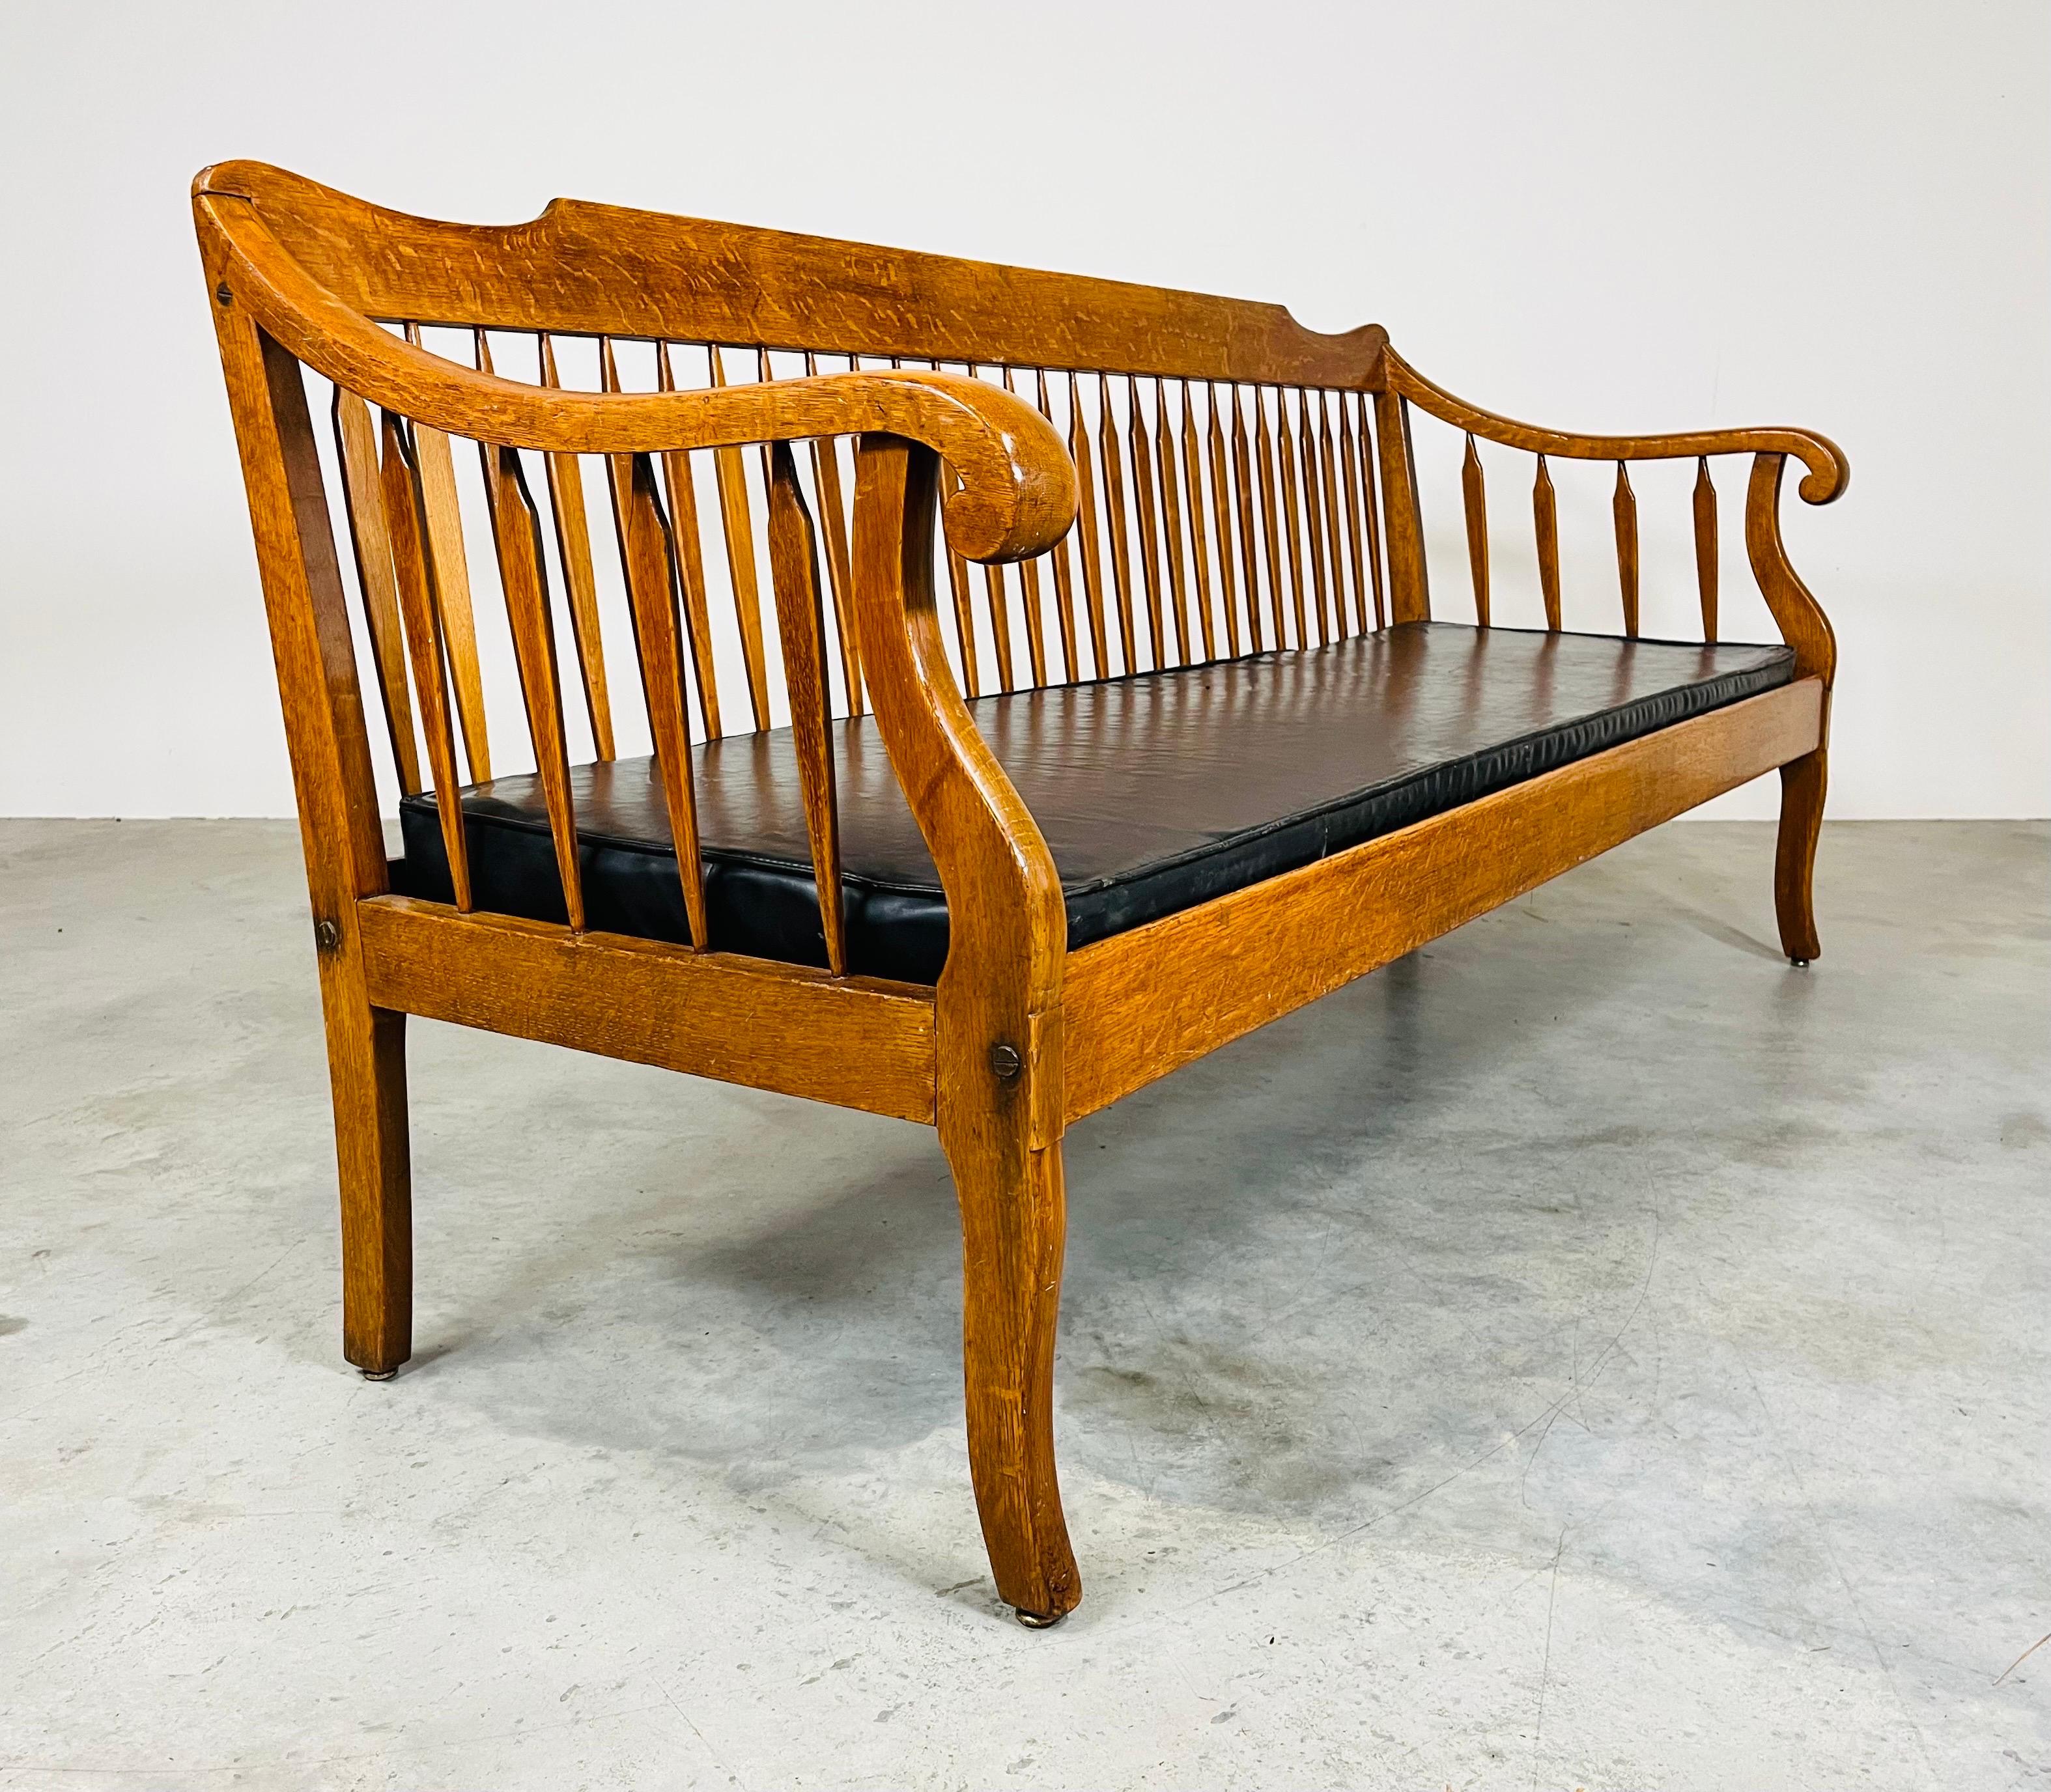 An especially handsome early 20th c. Lawyers bench of striking Tiger Oak with unusual arrow back & arms, heavy bronze as well as mortis & tenon joinery upholstered in black leather. The well constructed solid frame boasts an interesting combination